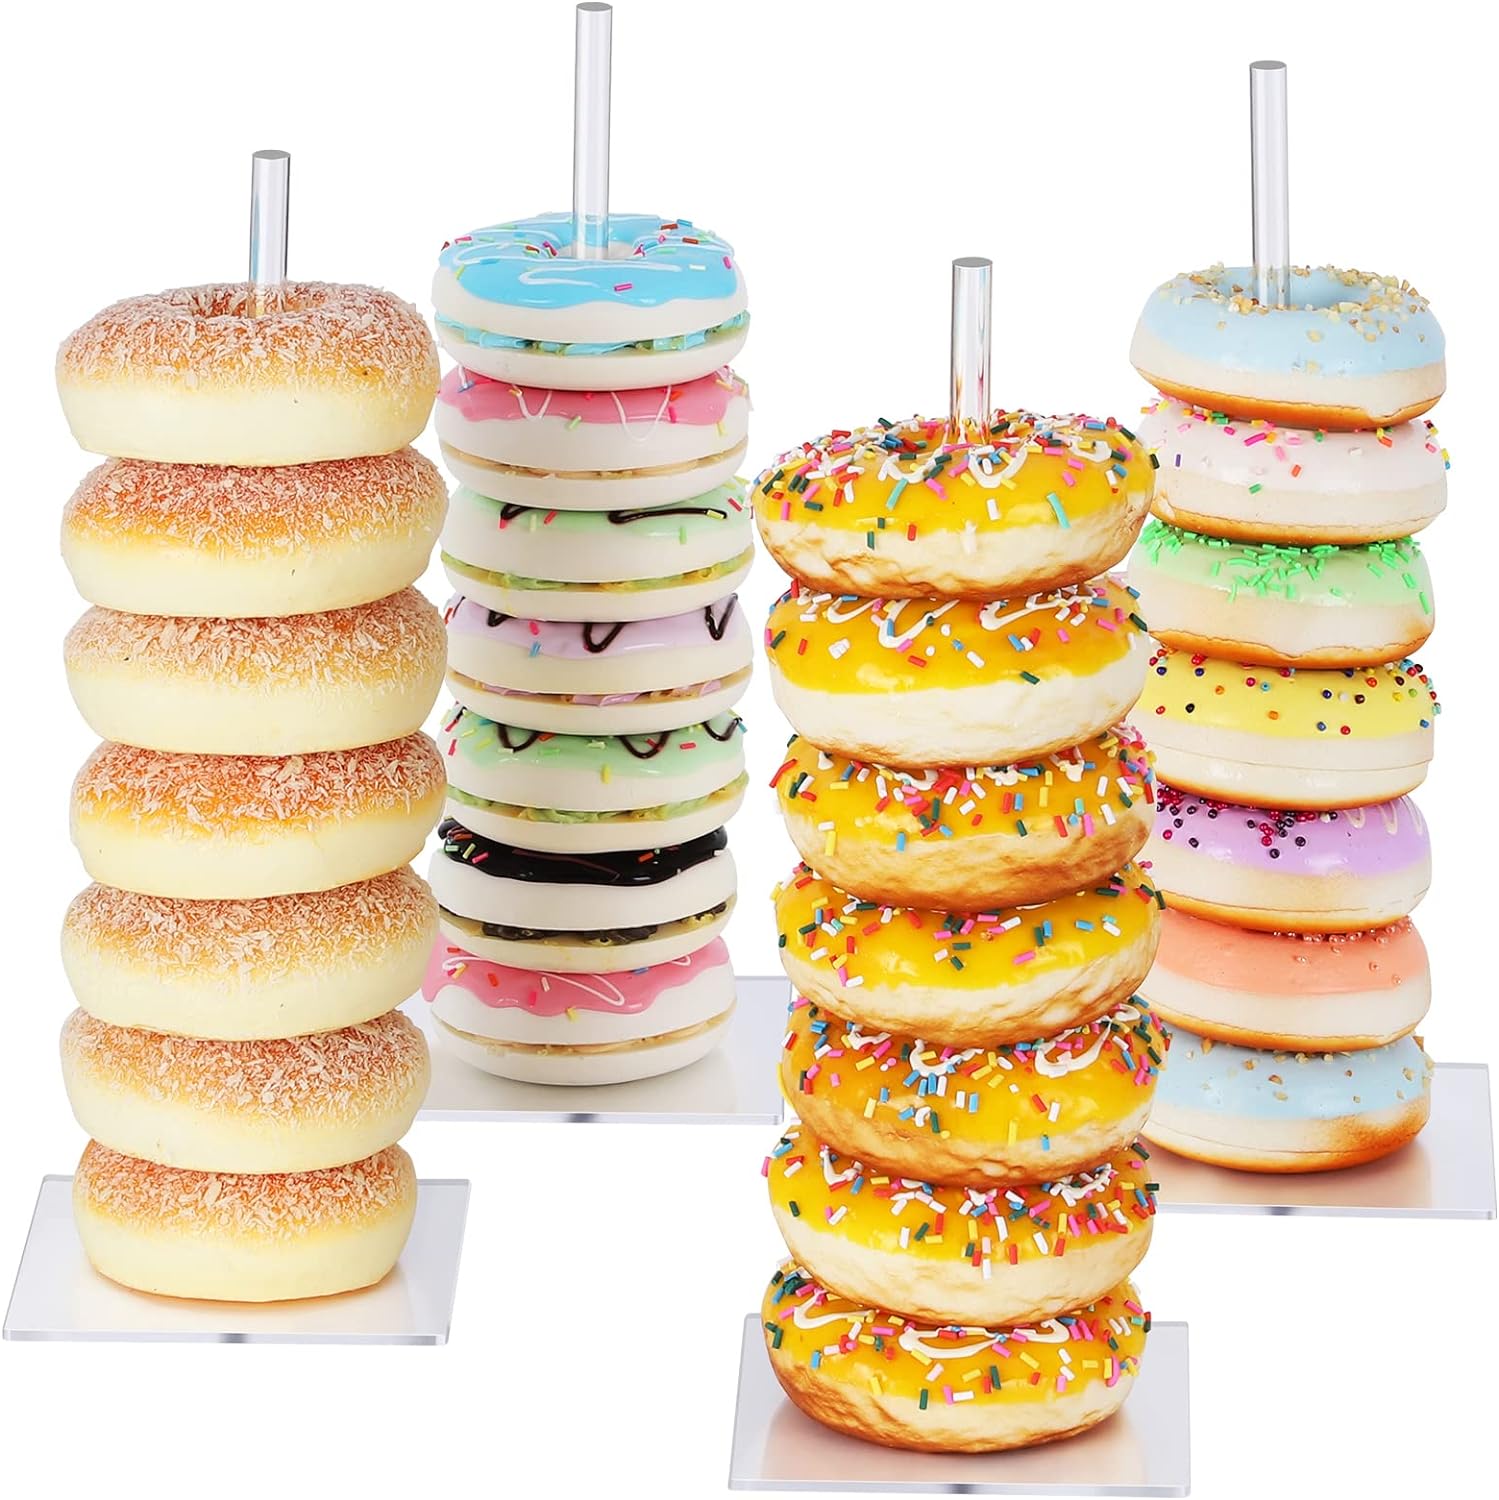 These are a really nice addition to a dessert table.  The donut stands are ascetically pleasing and add interest to any party table. They hold about 8 to 10 donuts.  They are well made, sturdy and easy to assemble and disassemble.